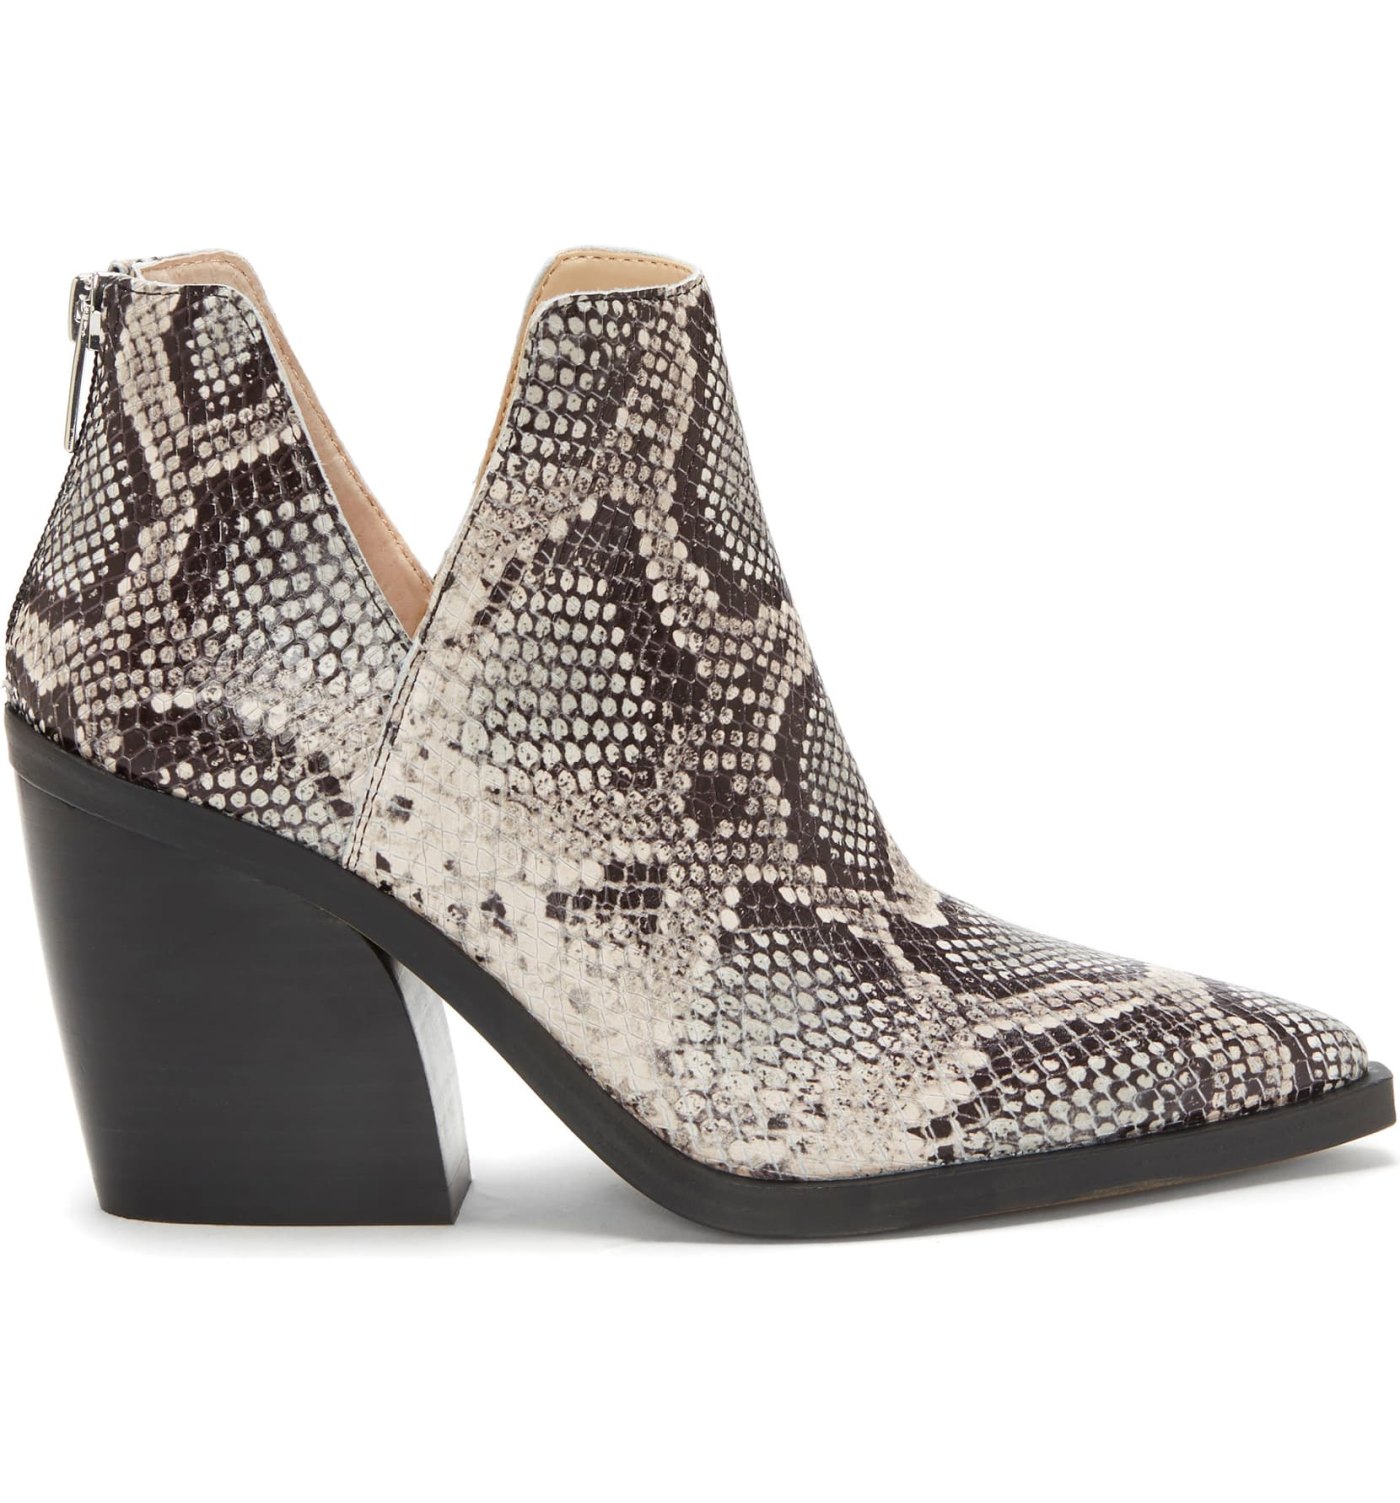 Vince Camuto Booties Perfectly Balance Classy and Edgy — 33% Off ...